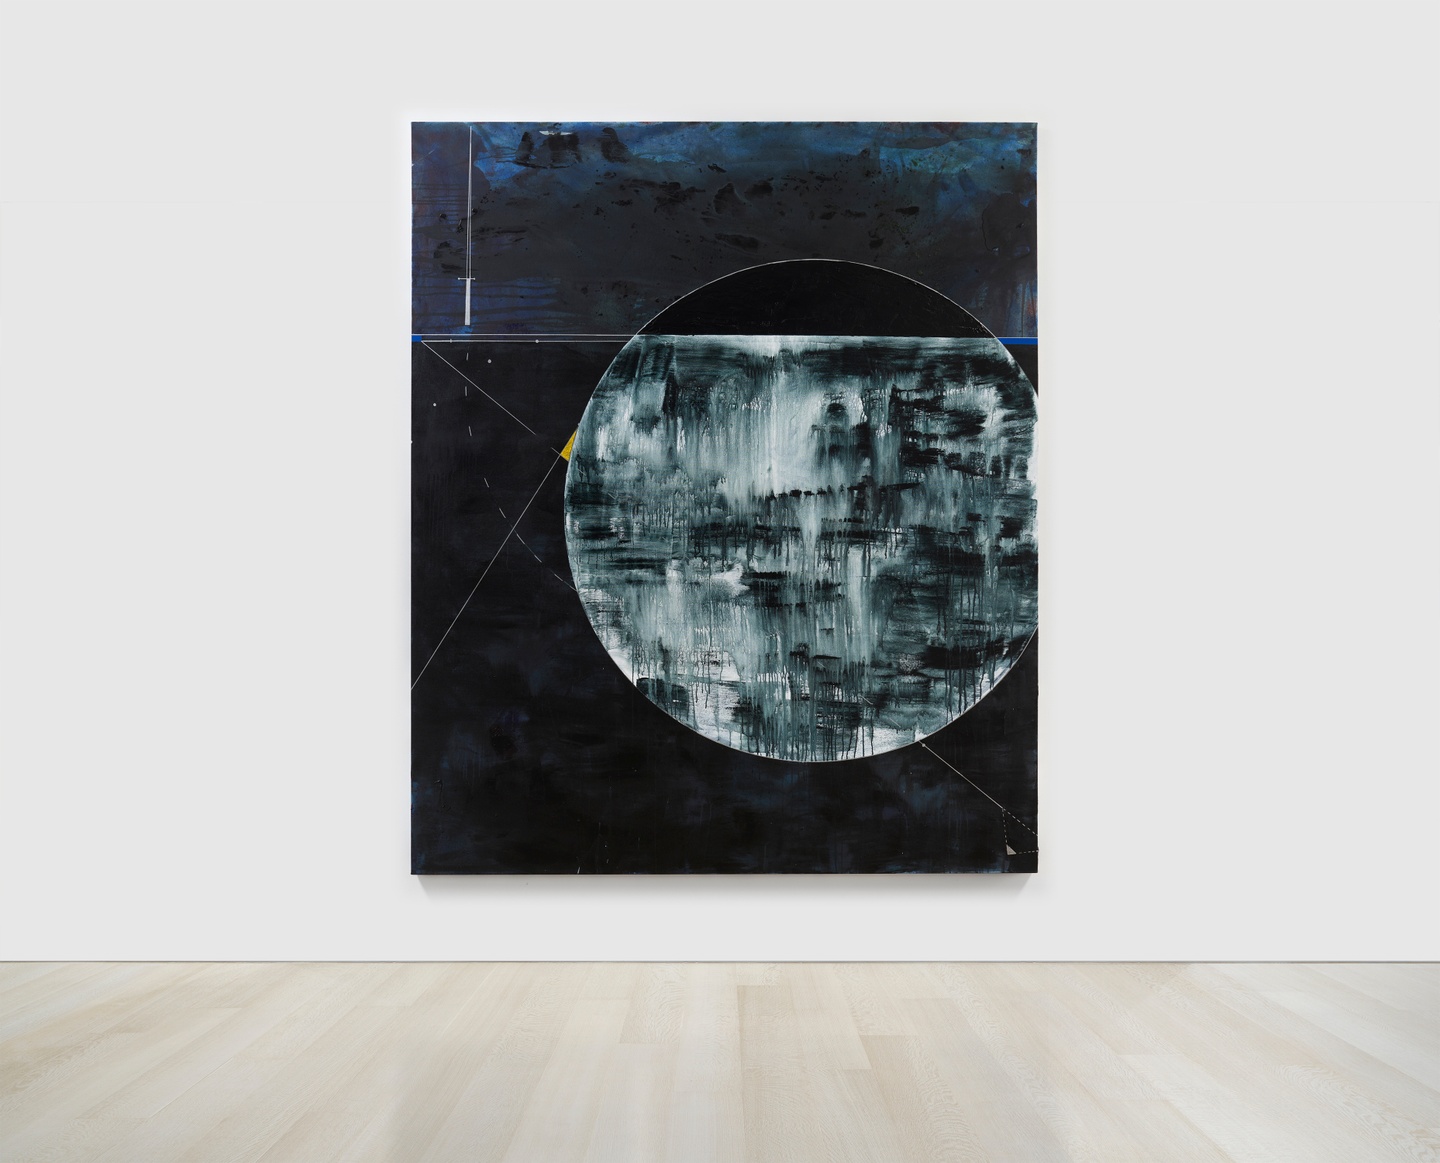 An abstract painting in dark blues and grays with geometric shapes in outline and a large circle in layered, dripping paint